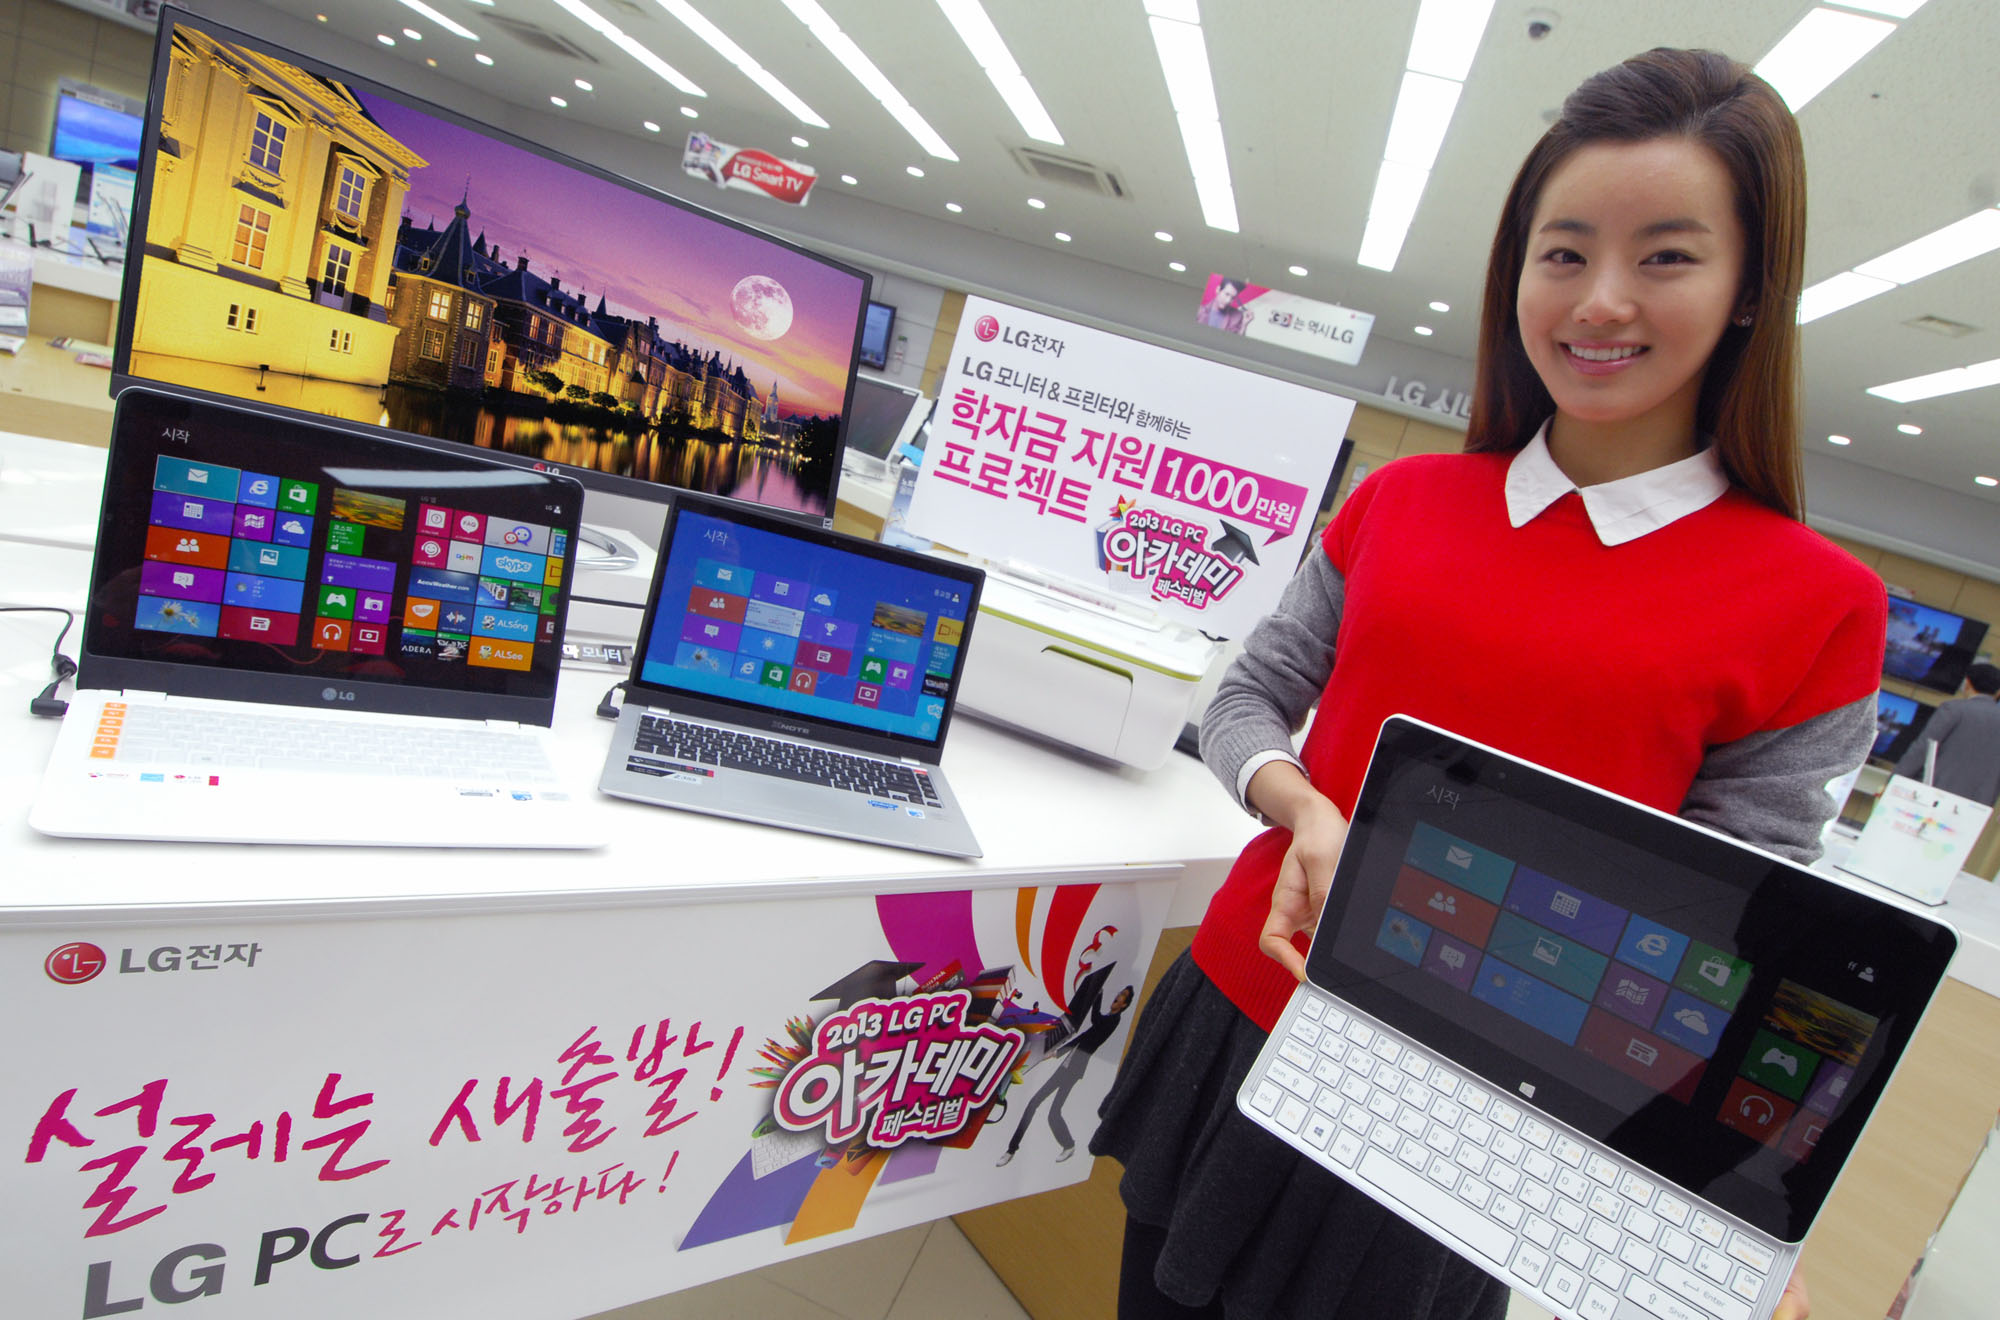 a woman standing in front of two open laptops